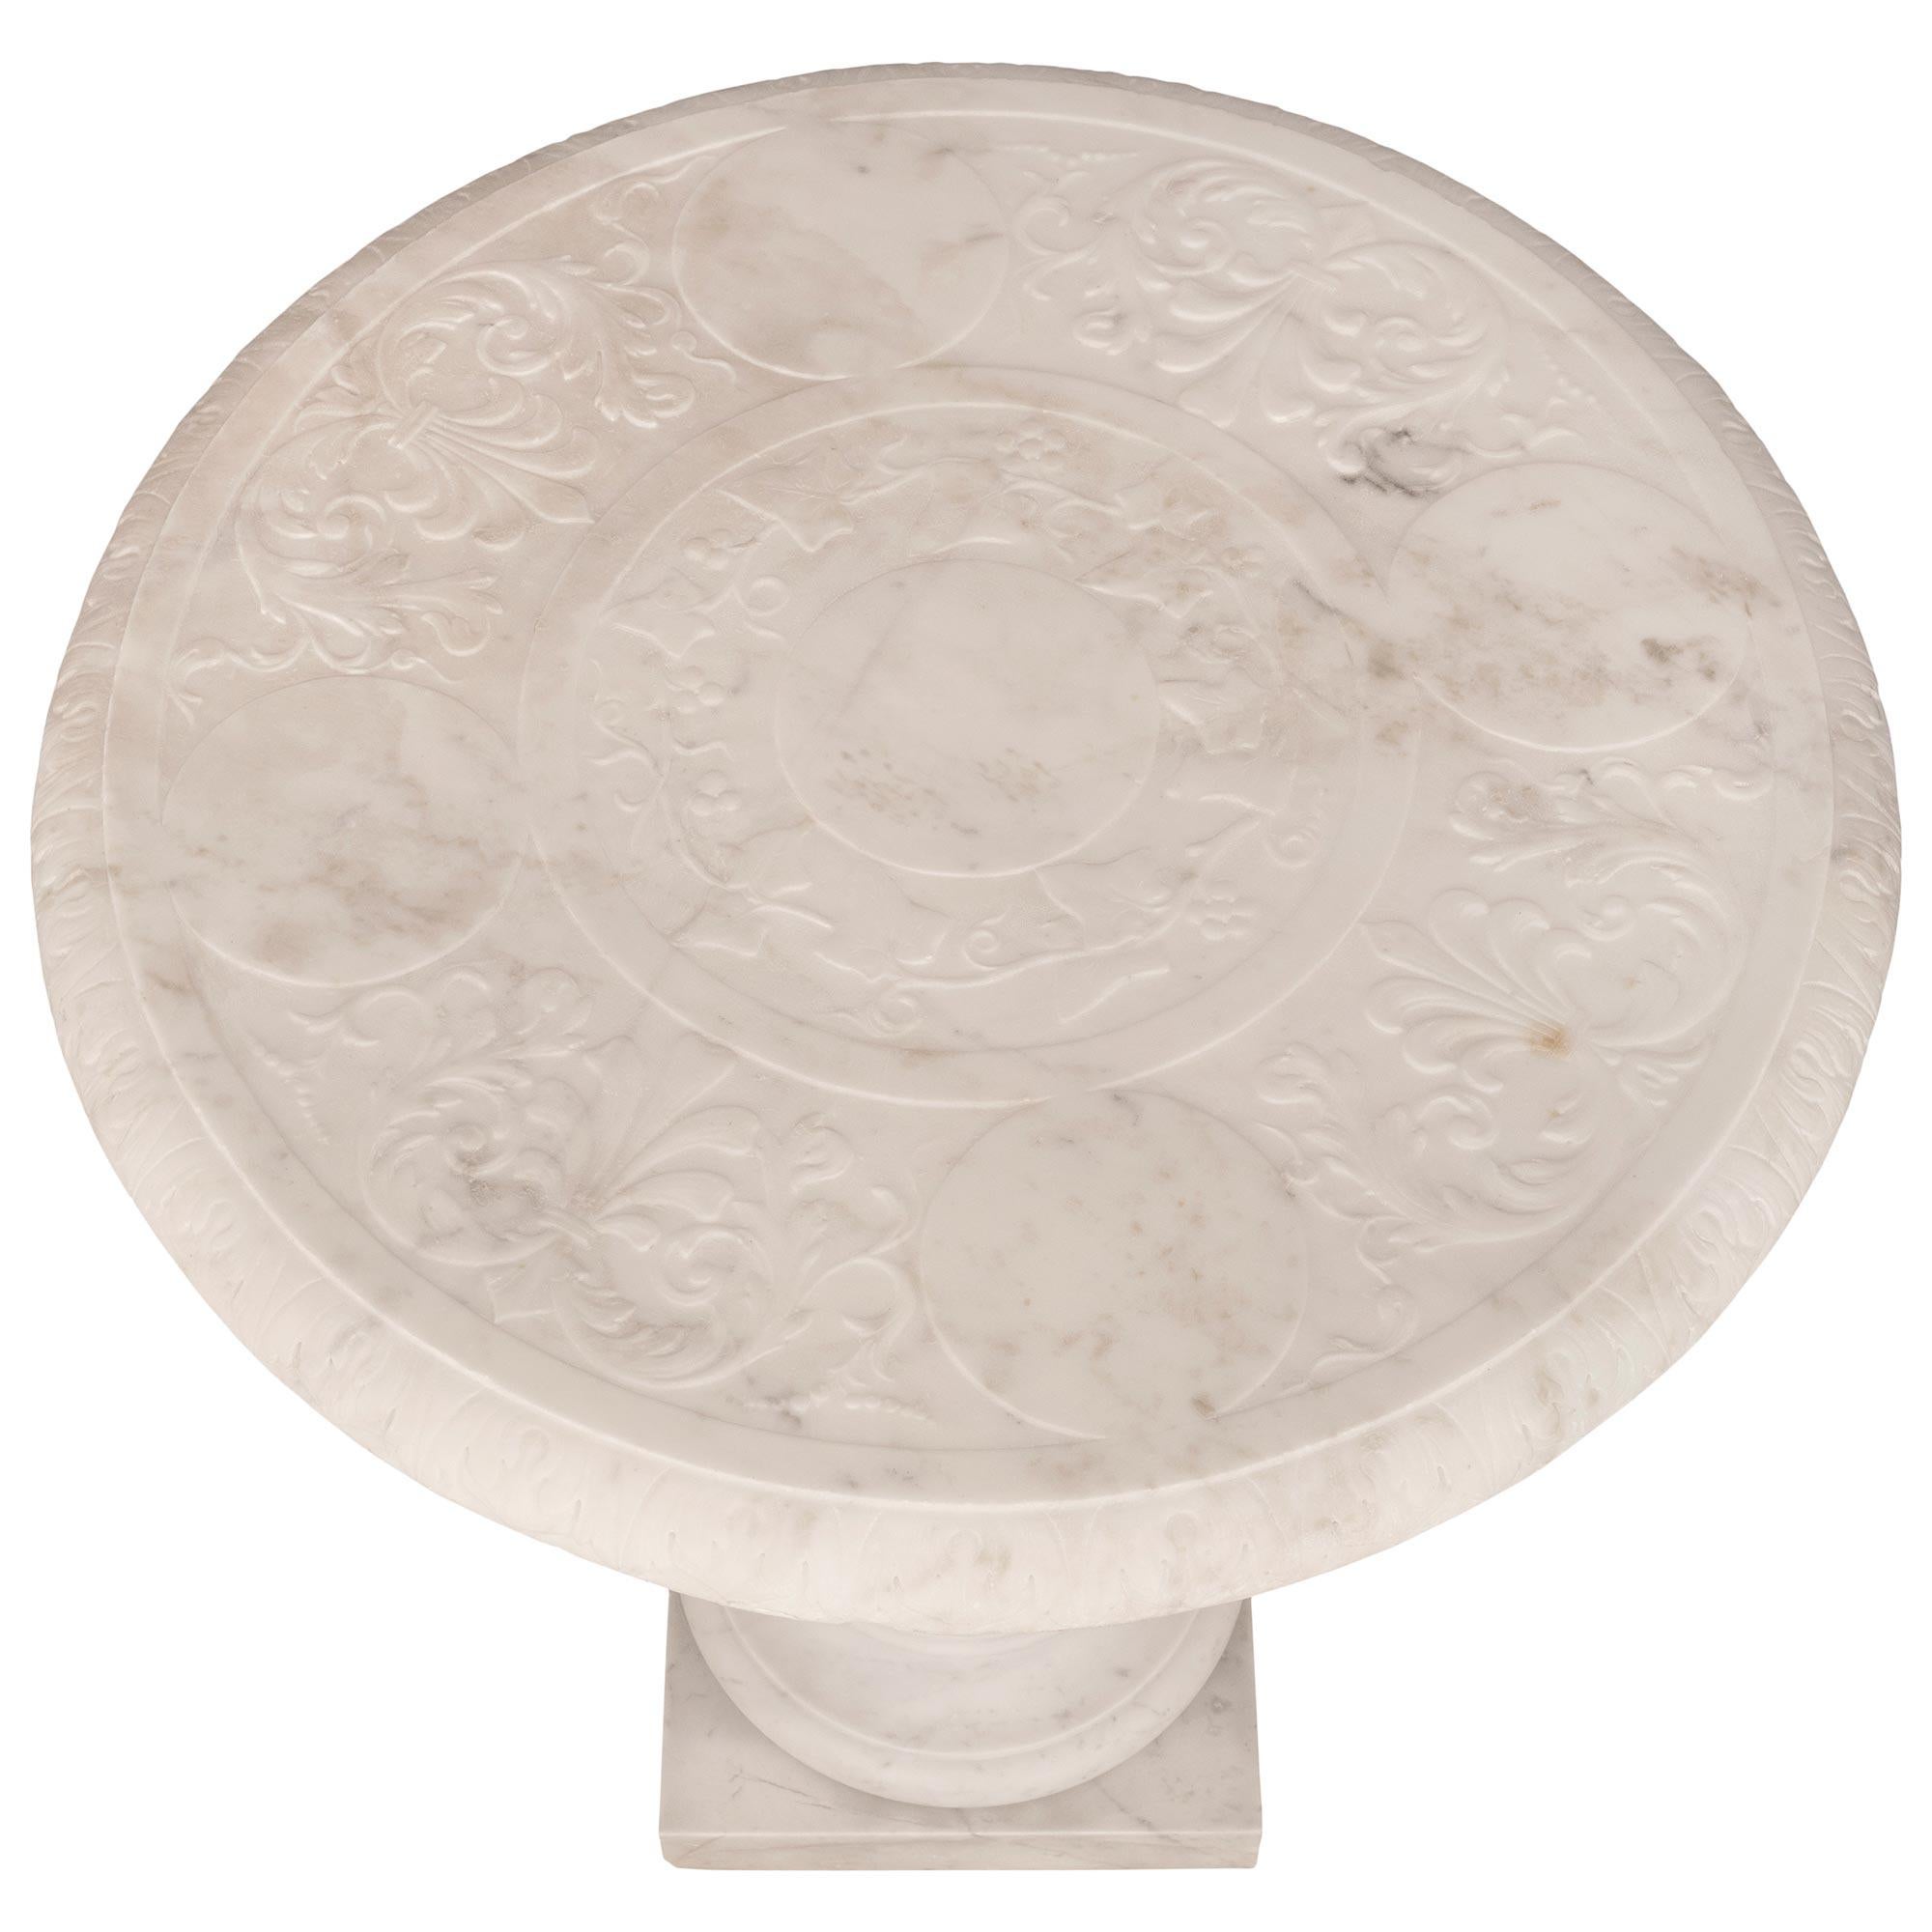 A stunning and most elegant Italian 19th century Louis XVI st. solid white Carrara marble side table. The circular table is raised by a square base with a circular lightly curved mottled support. The baluster shaped column displays exceptional